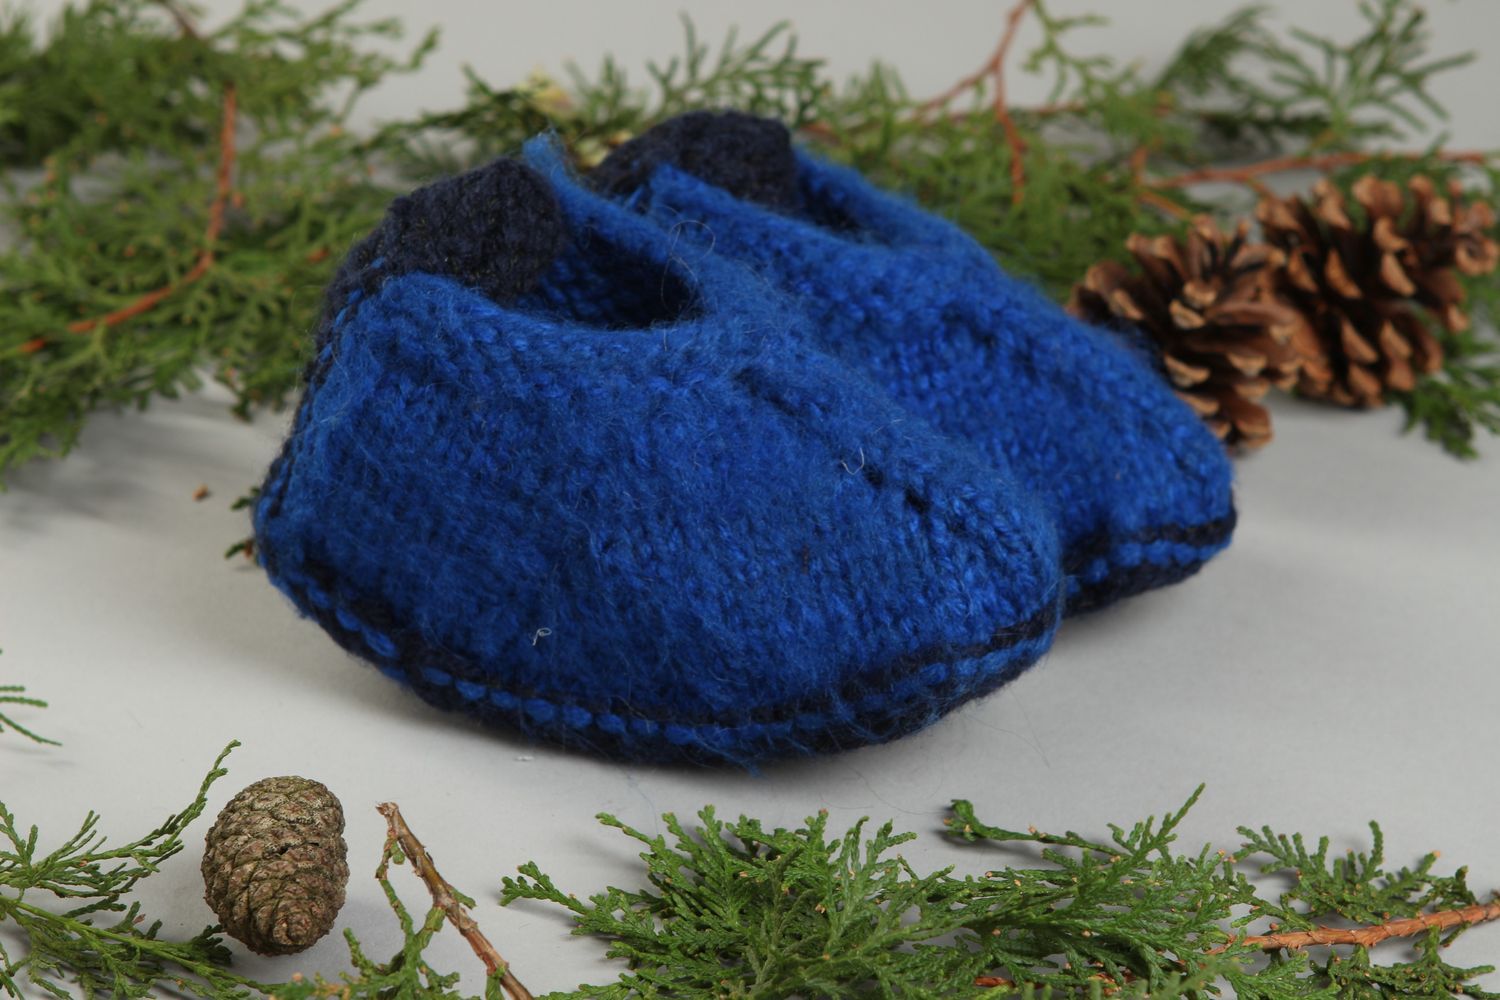 Handmade knitted slippers home goods knitting ideas accessories for kids photo 1